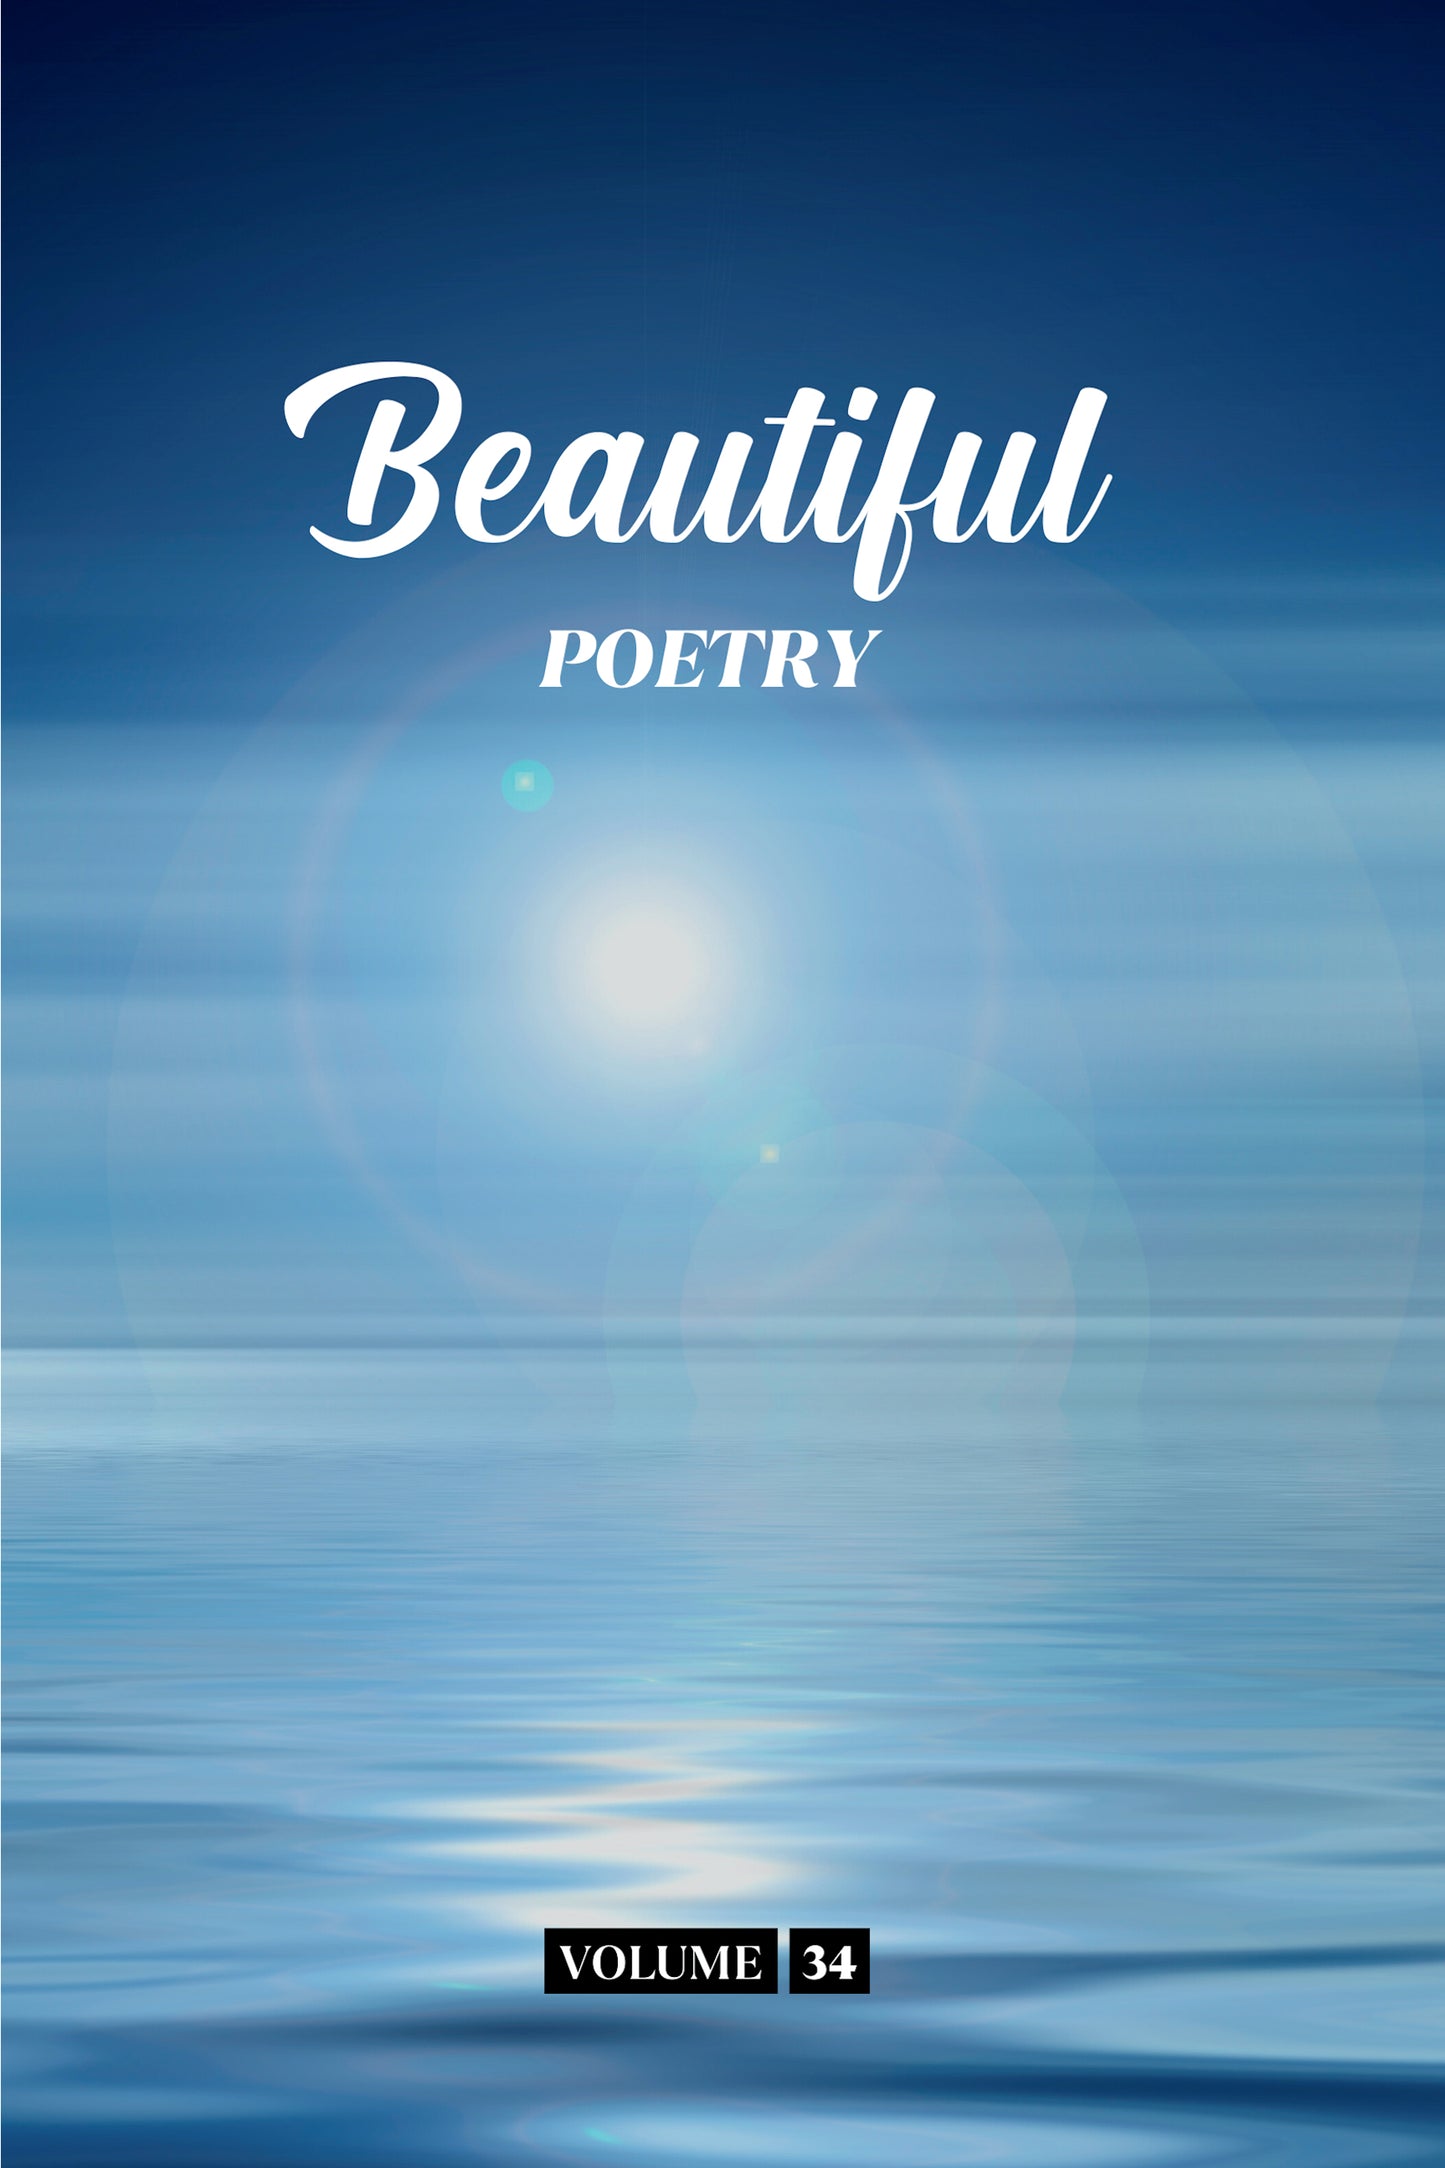 Beautiful Poetry (Volume 34) - Physical Book (Pre-Order)